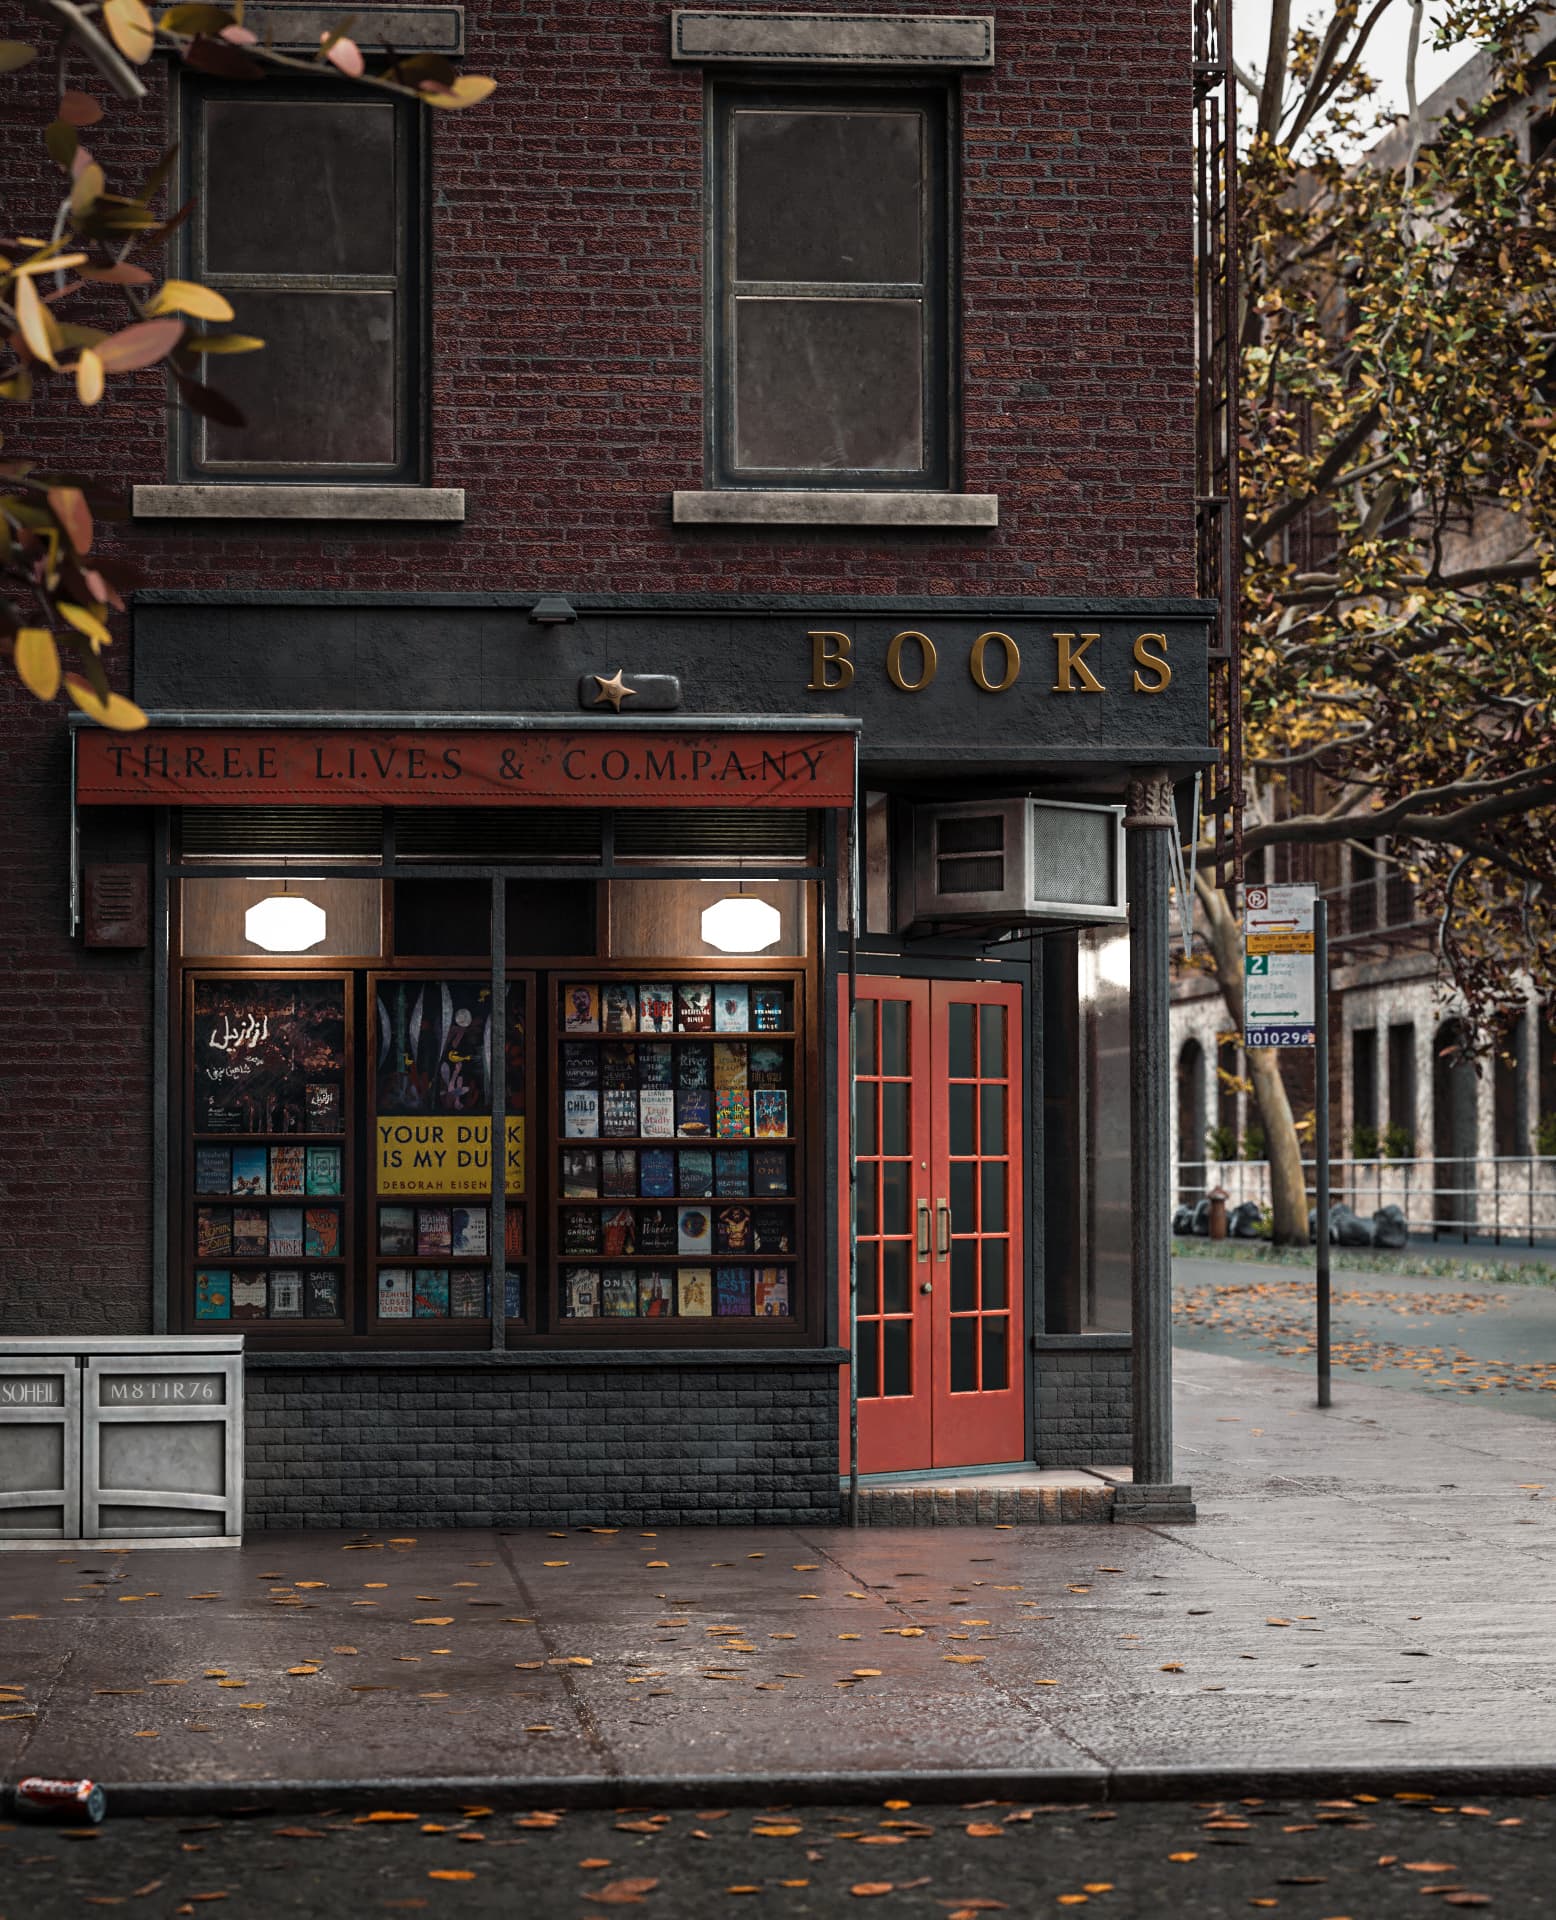 Bookstore - Finished Projects - Blender Artists Community